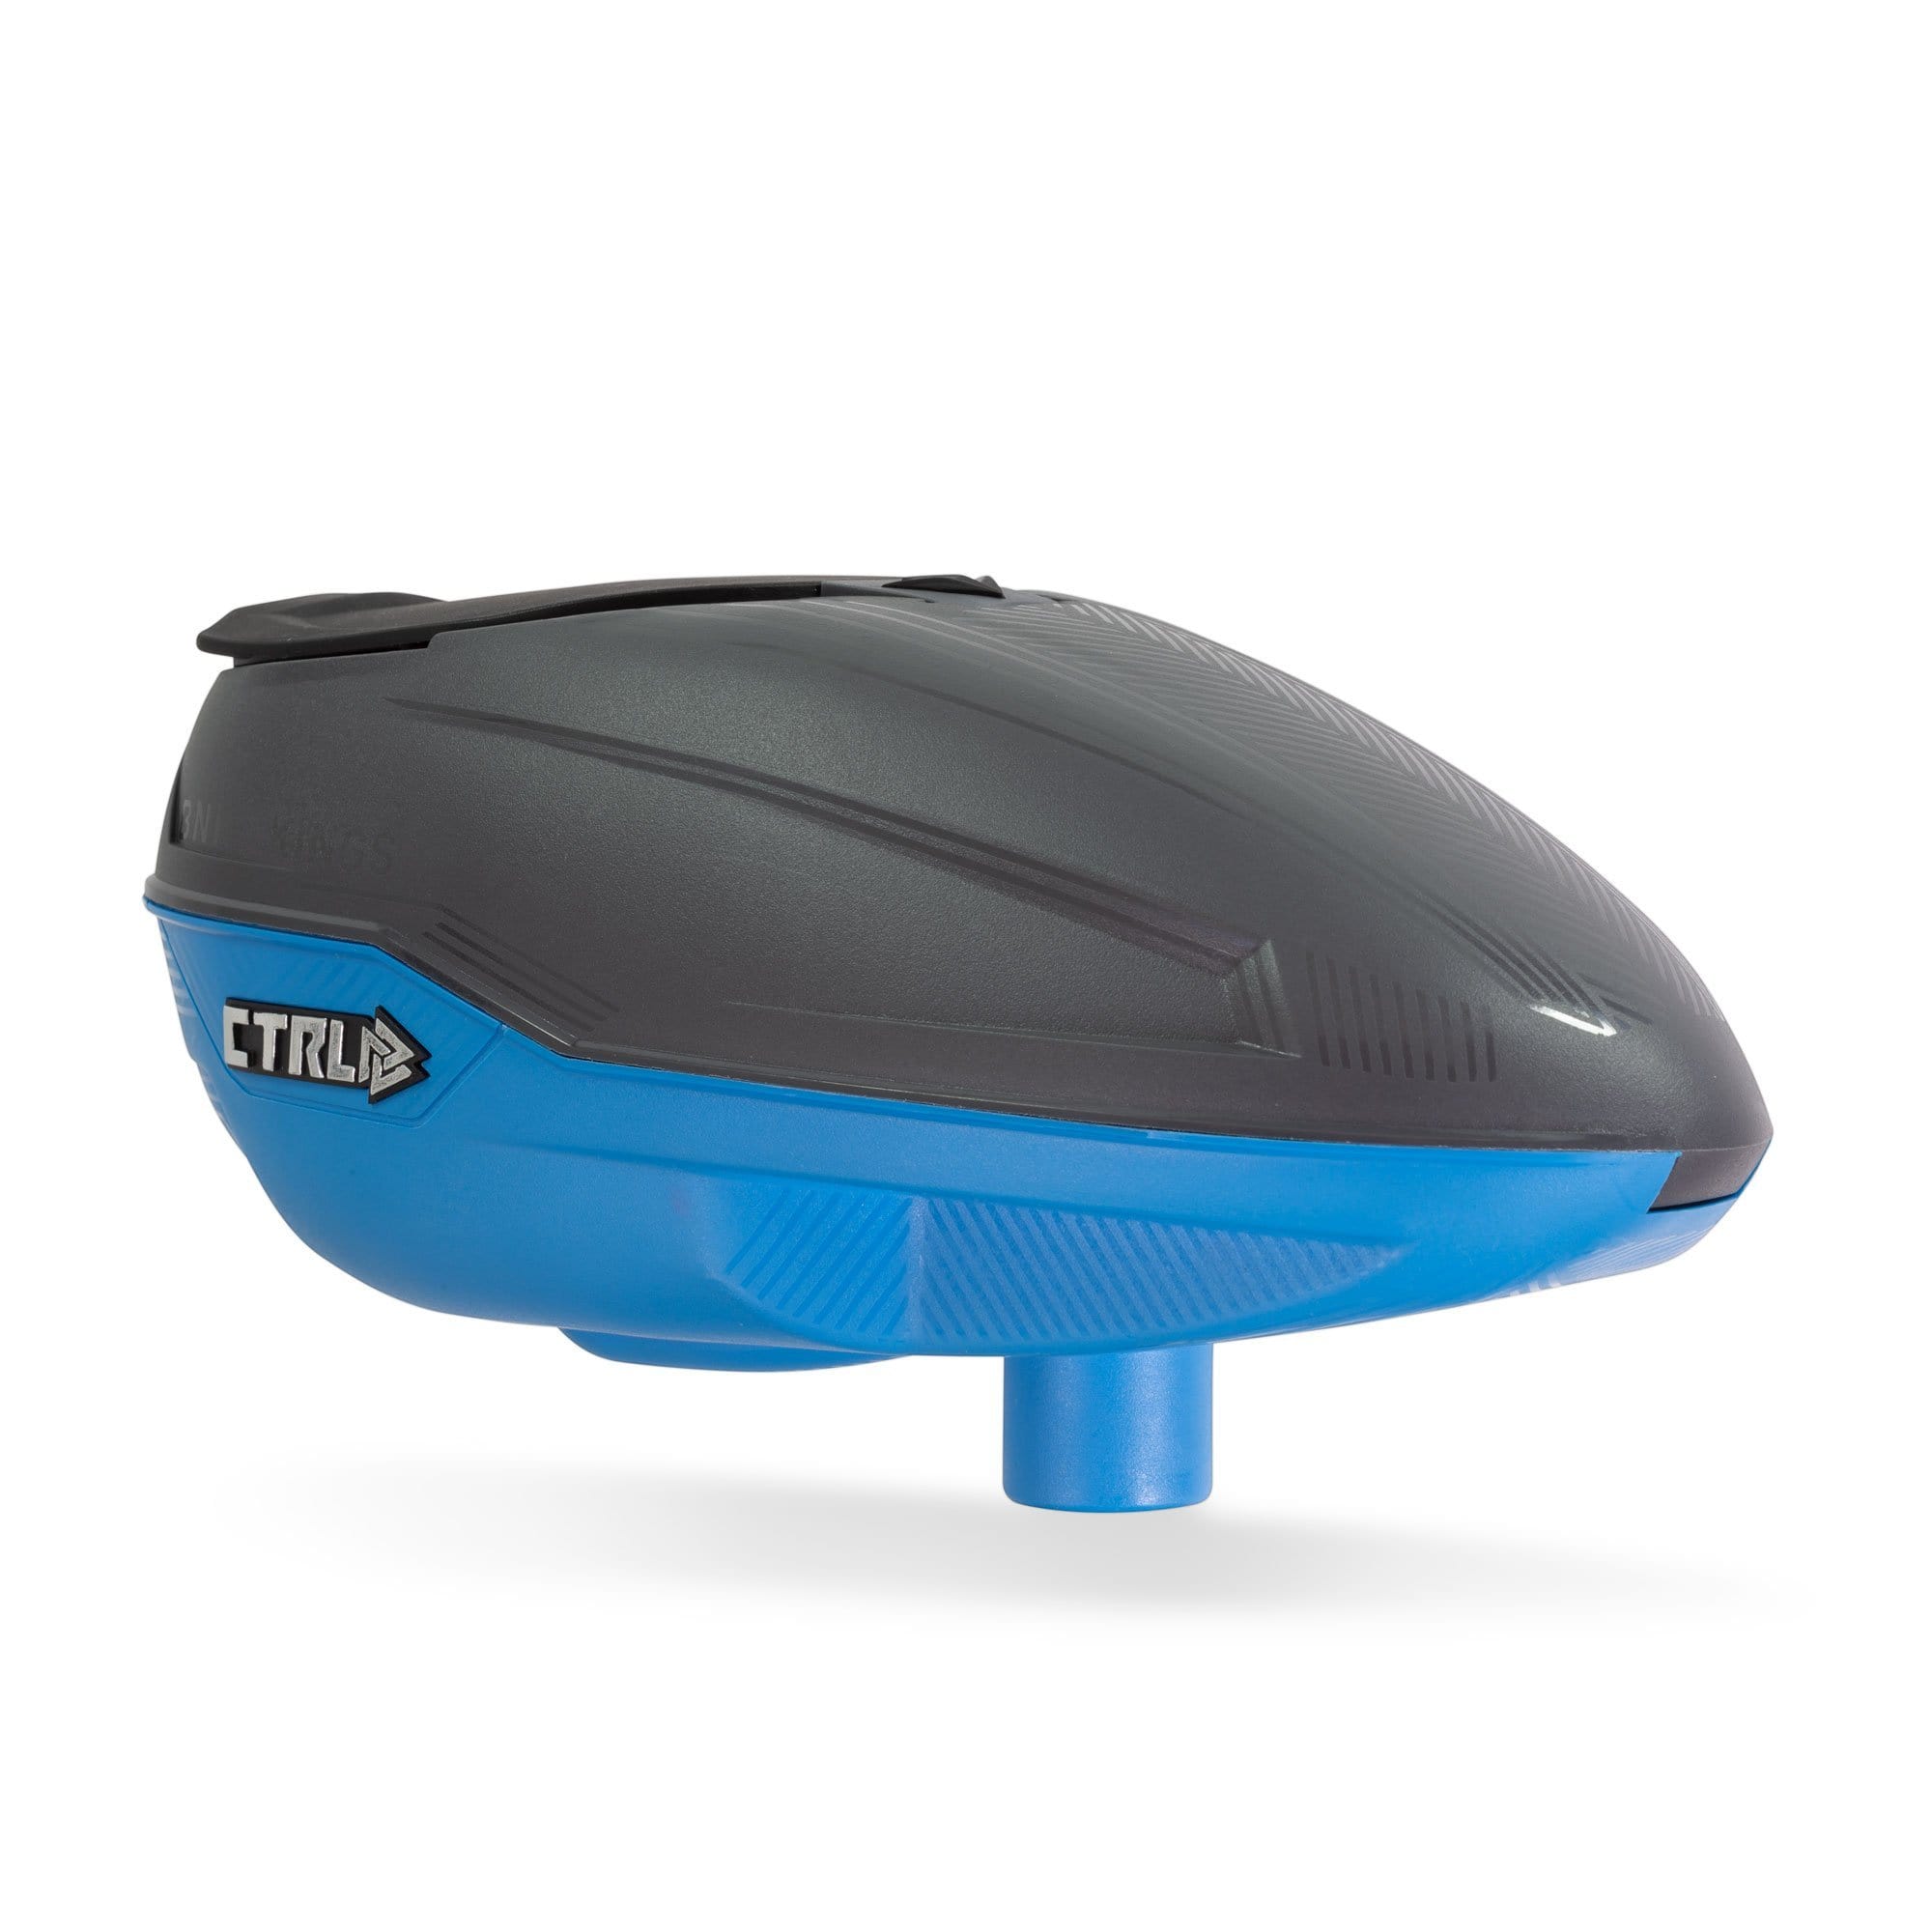 Bunkerkings CTRL Loader - Graphic Blue - Eminent Paintball And Airsoft